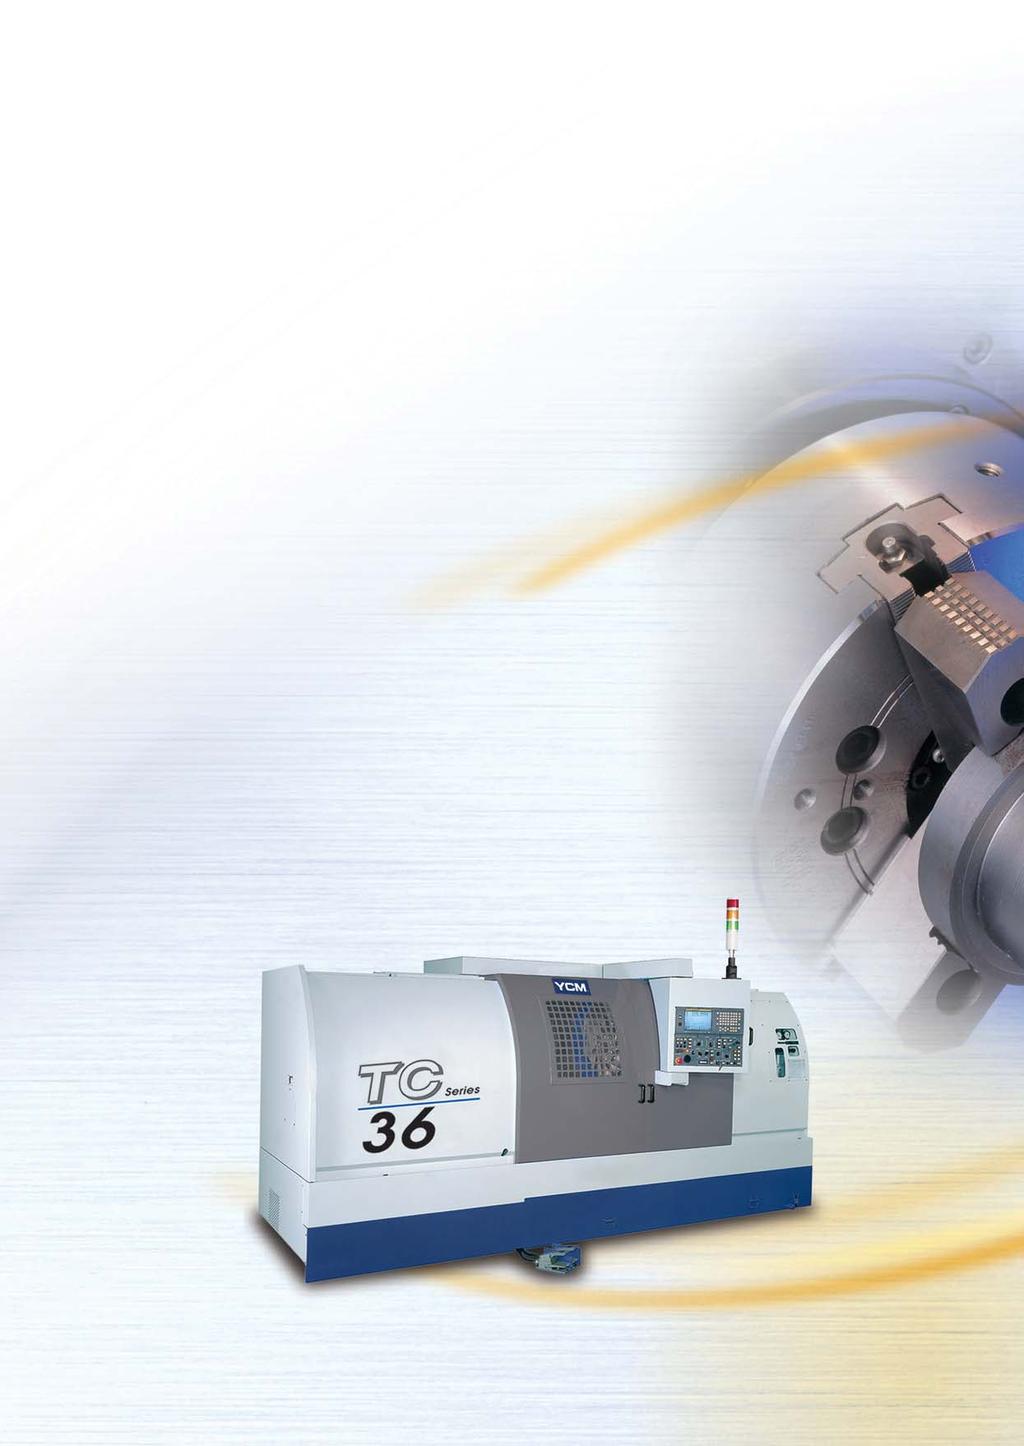 High performance CNC Lathes The utmost performance CNC lathes are specially developed for mass turning production, as in automotive, aerospace, oil and IT electronic industries.